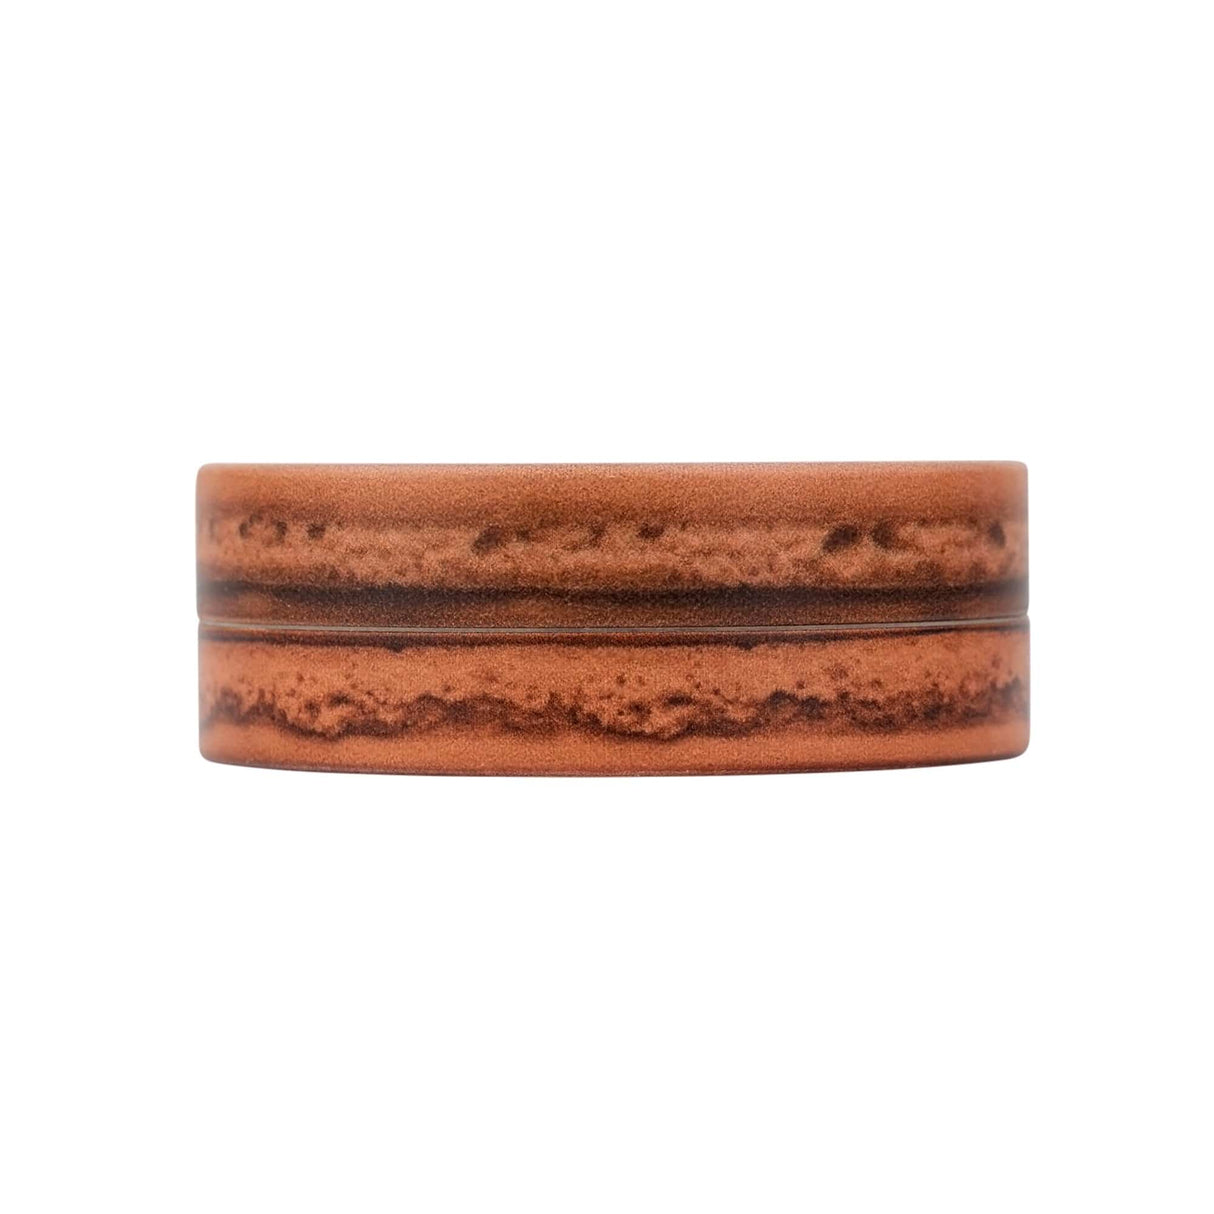 V Syndicate Macaron Chocolate 2-Piece Grinder, Compact Design, Front View on White Background